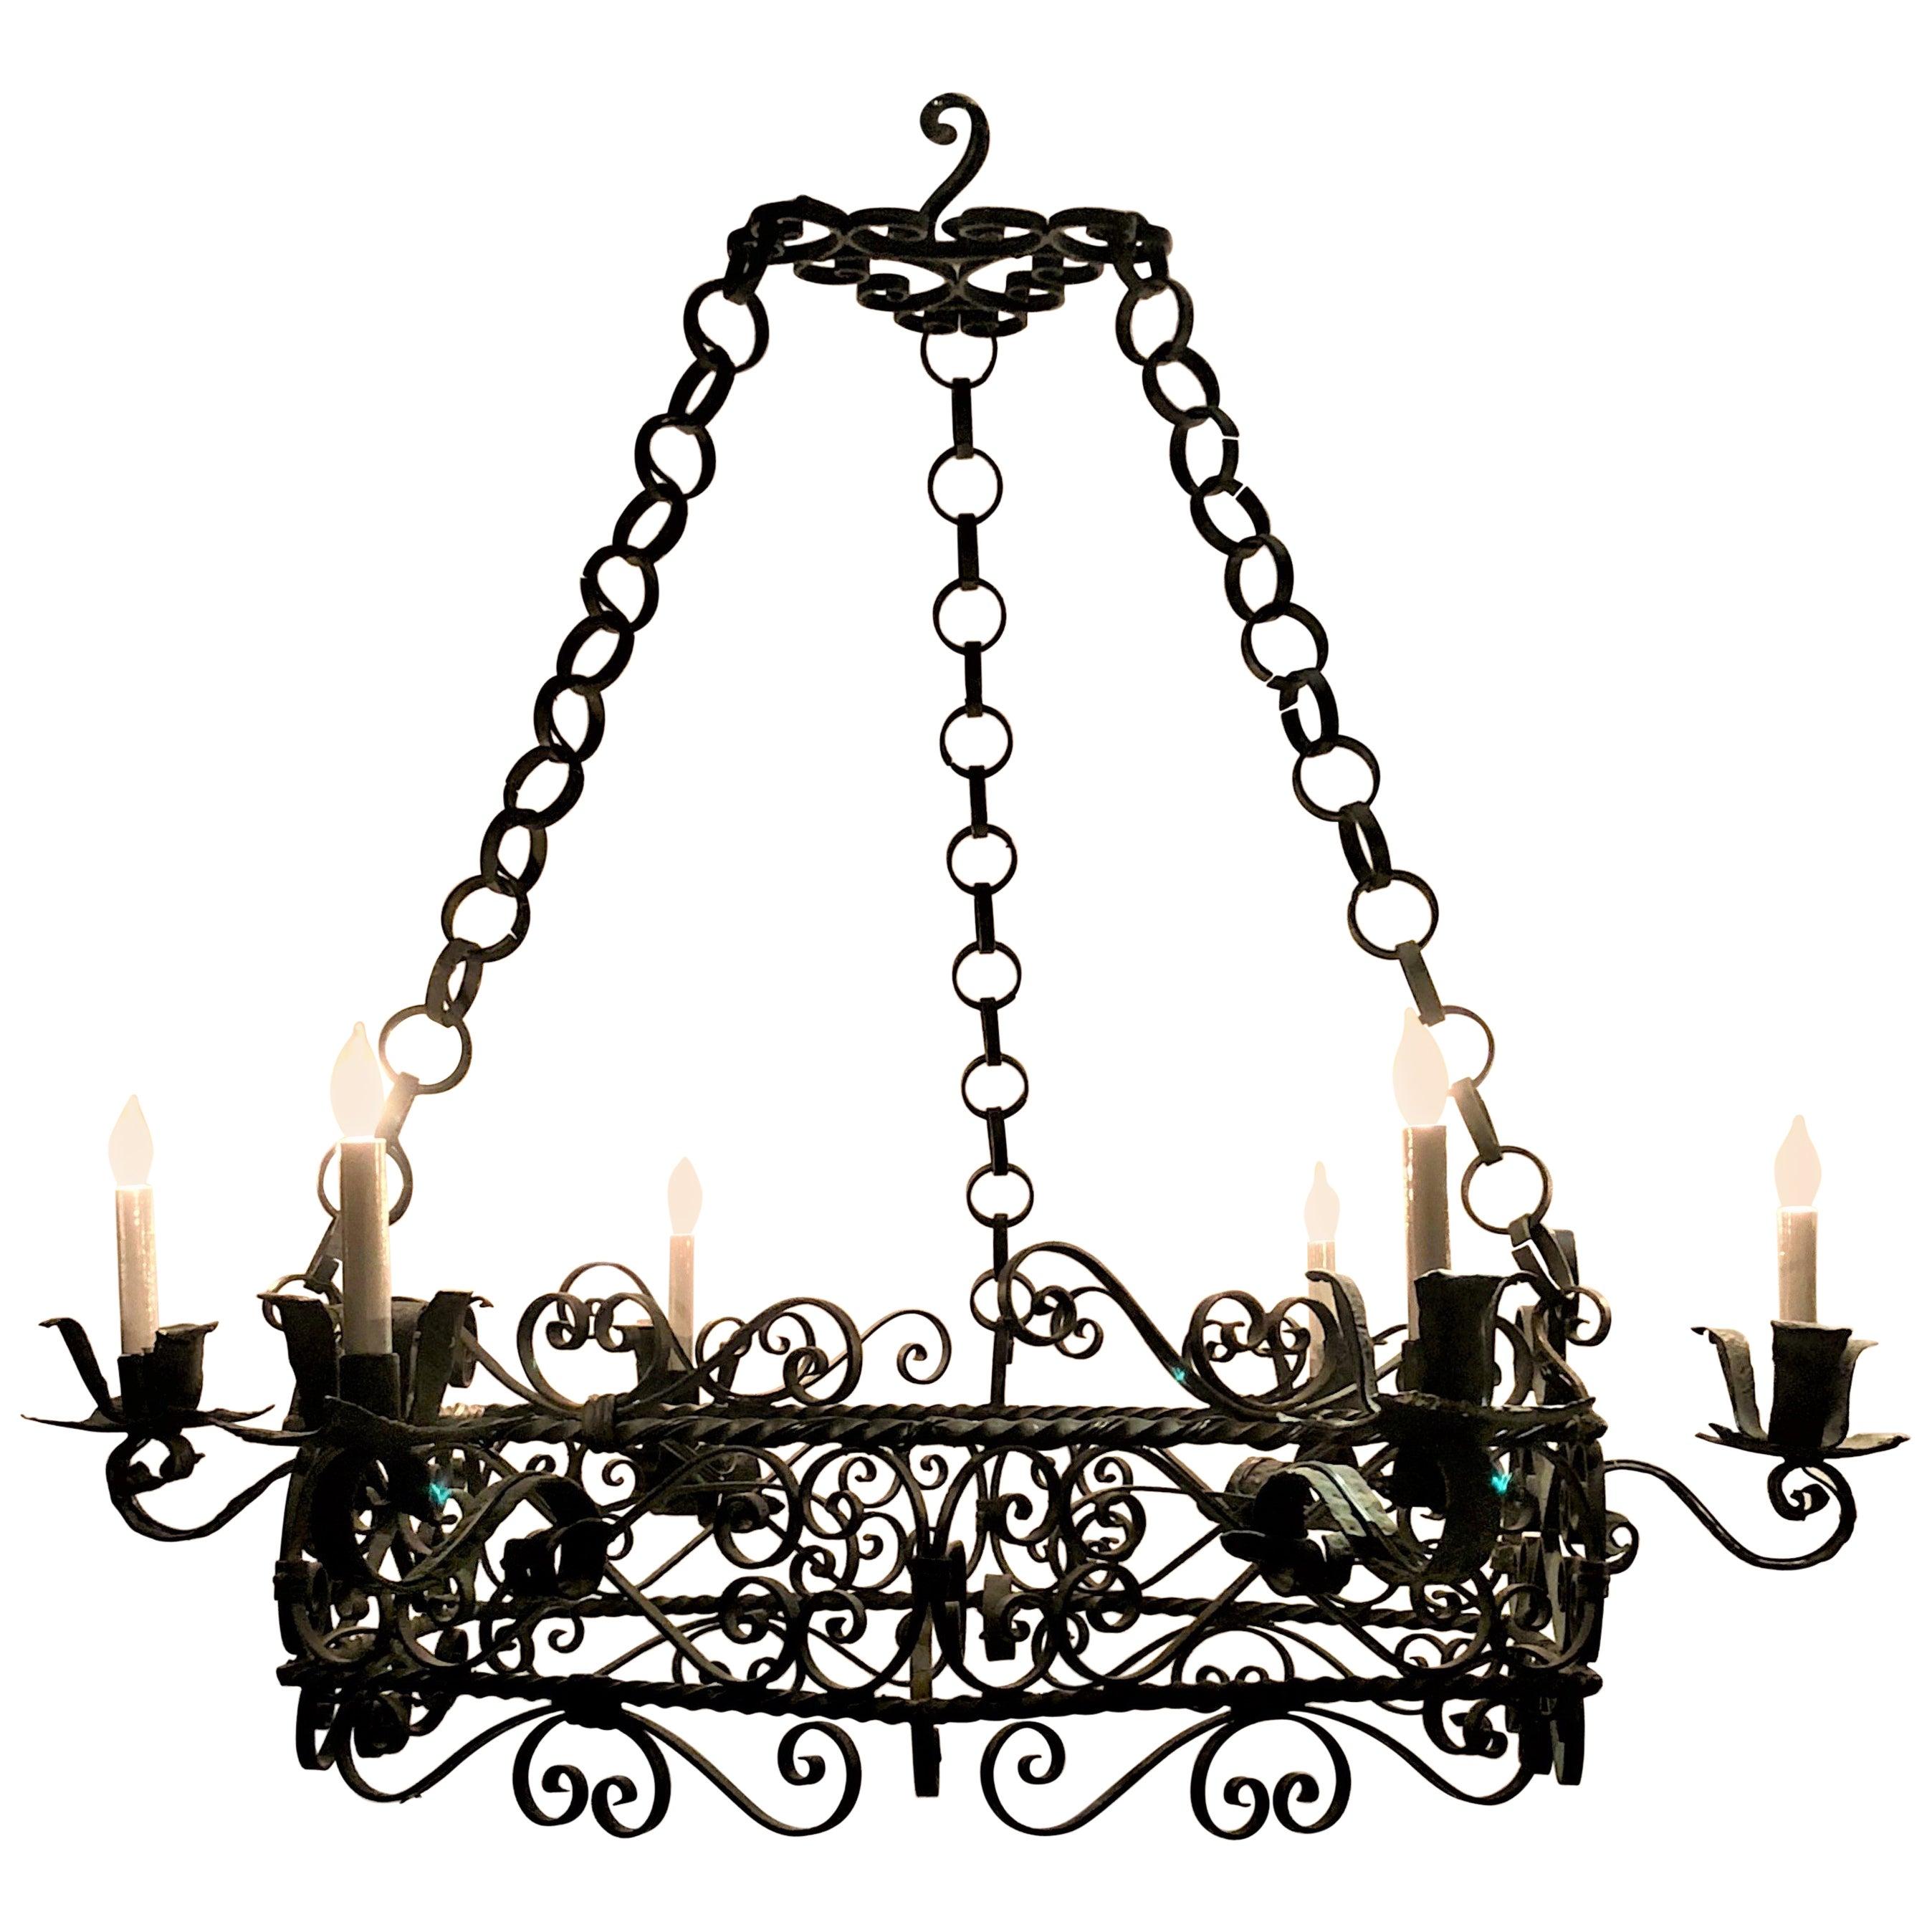 Antique French Wrought Iron Fixture, circa 1900-1910 In Good Condition For Sale In New Orleans, LA